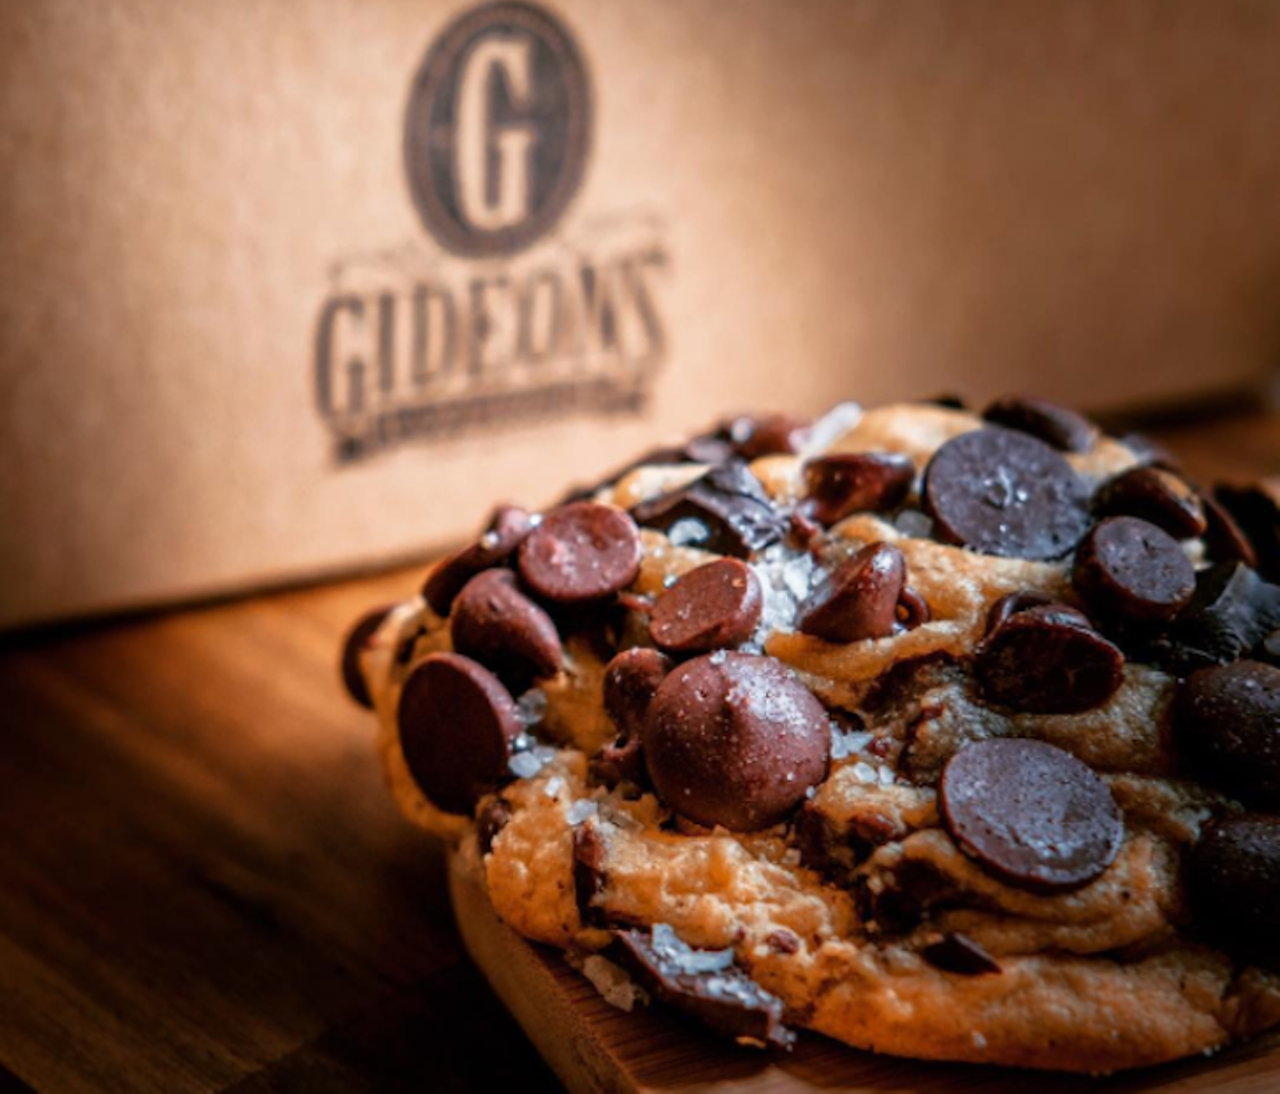 Gideon&#146;s Bakehouse
3201 Corrine Drive
The owners of Gideon&#146;s took a diary from 1898 filled with dessert recipes and gave it a modern touch up. What we have now are delicious concoctions like the candied walnut chocolate chip cookie and red velvet cheesecake. Not bad.
Photo via gideonsbakehouse/Instagram